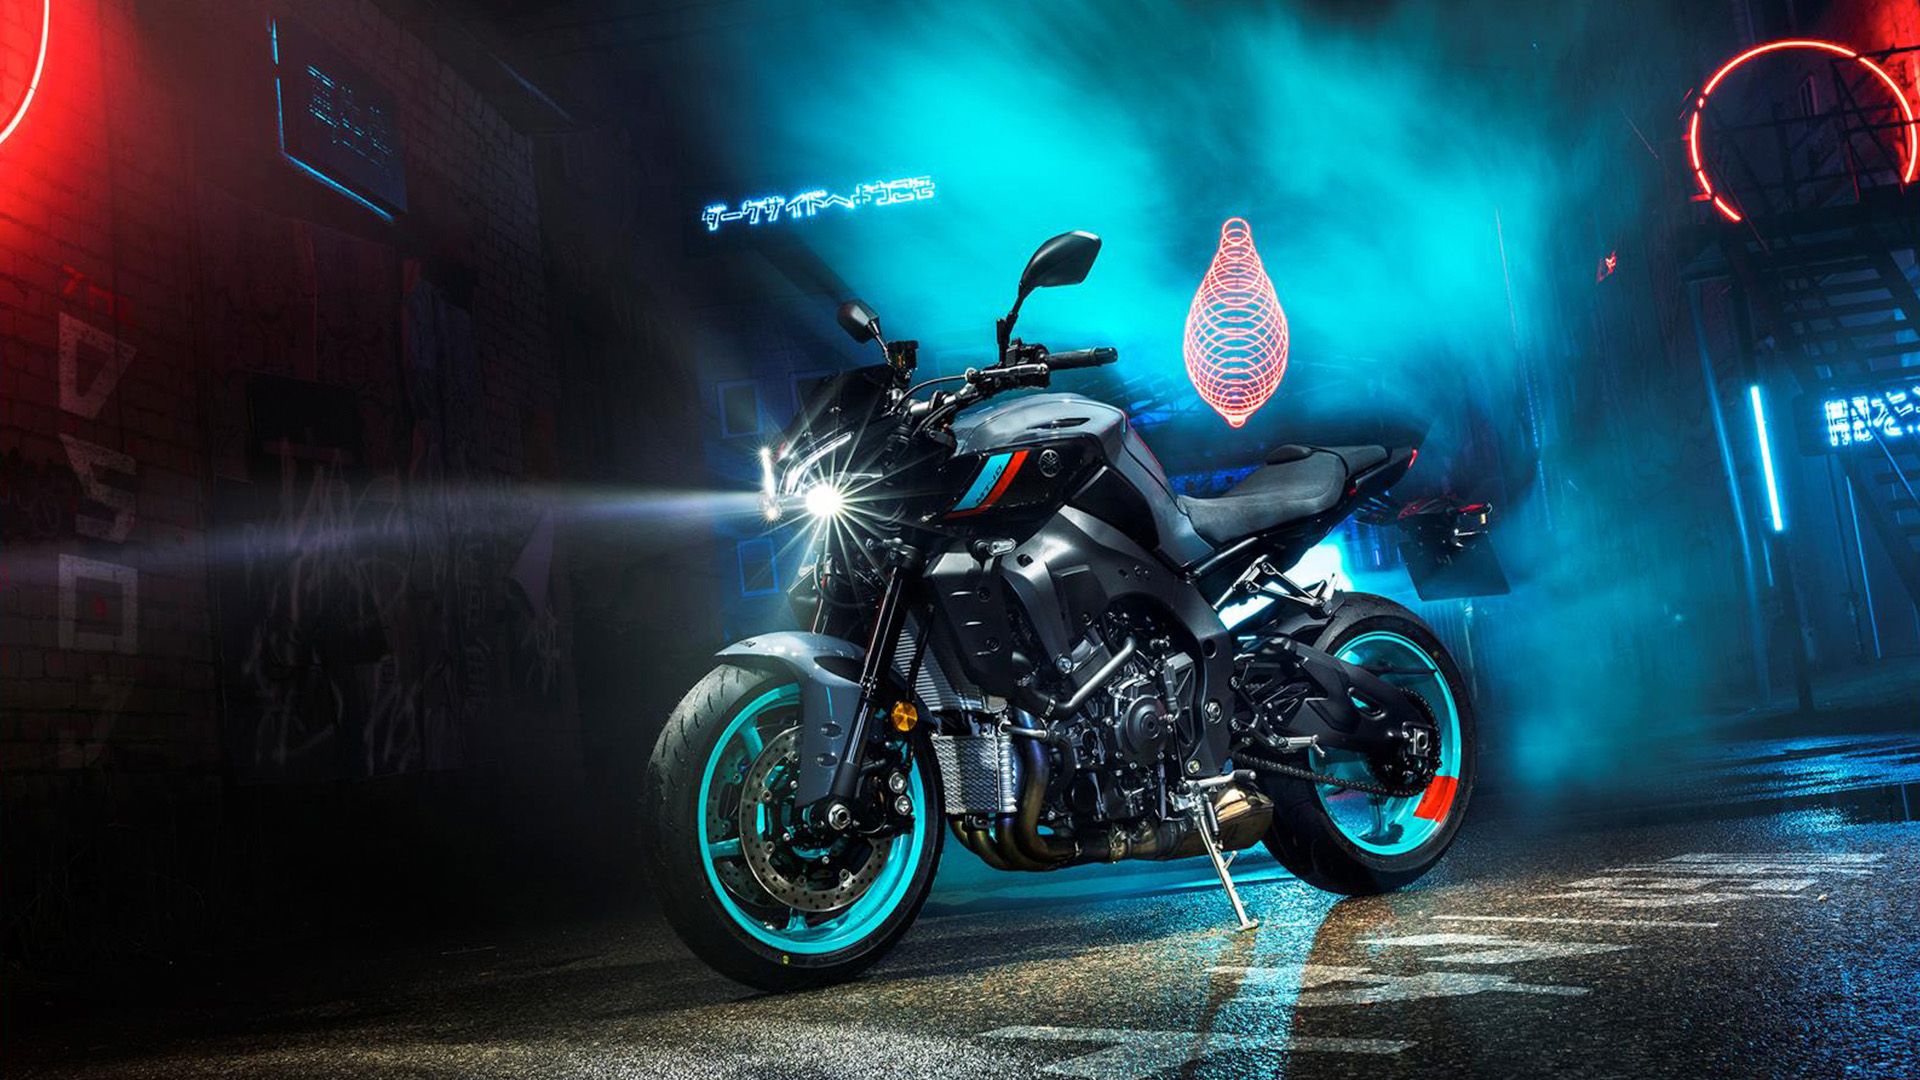 2023 YAMAHA MT-10 naked bike in a foggy street alley at night.